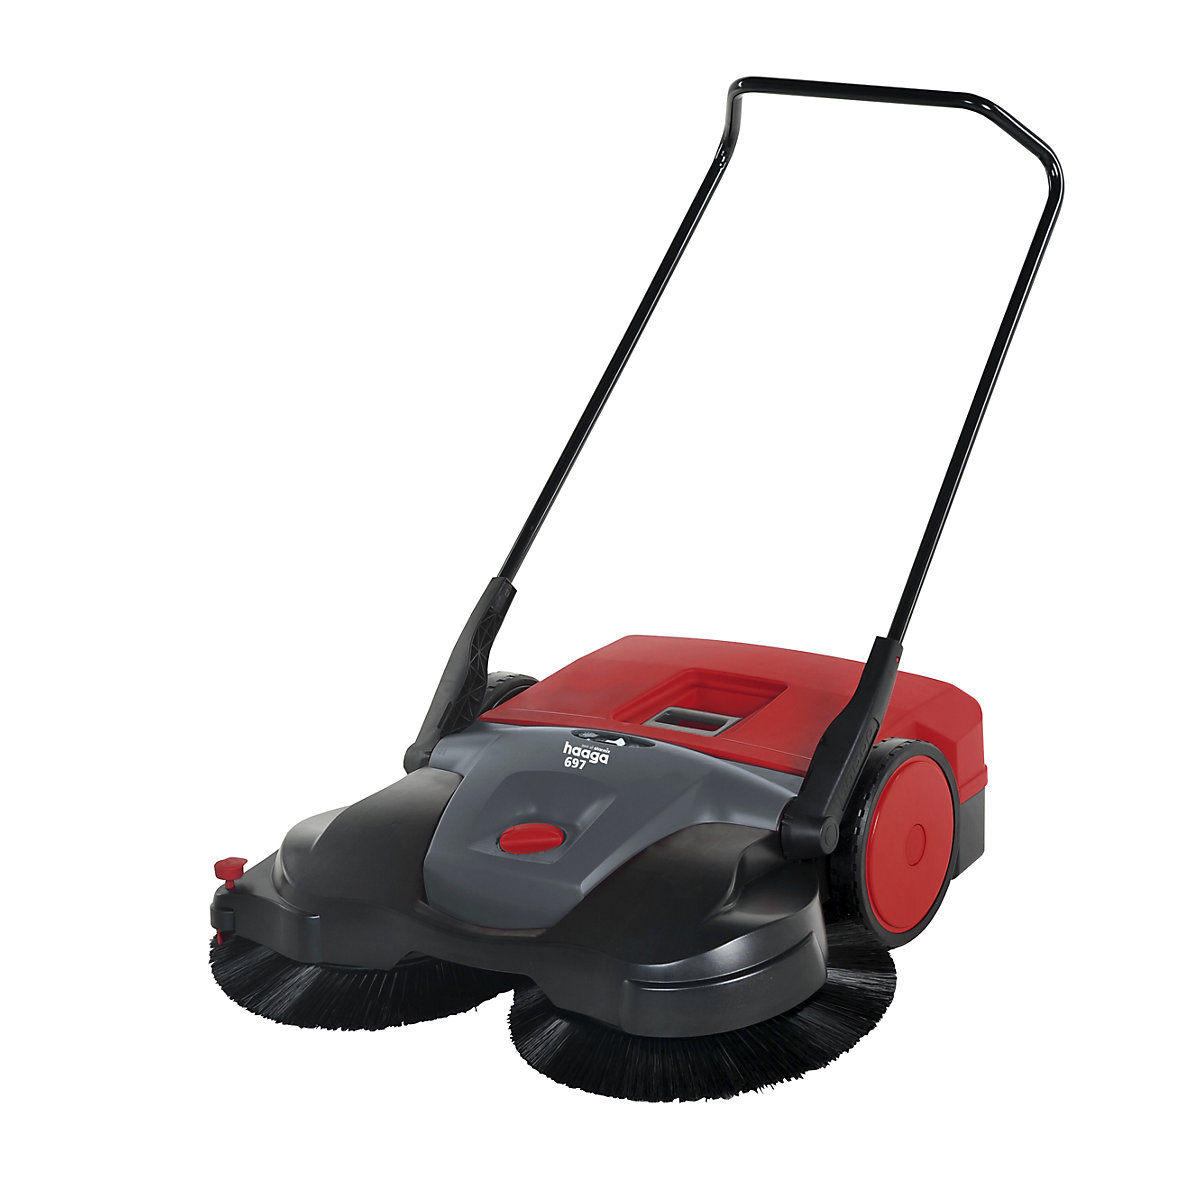 Sweeping machine – haaga, turbo sweeping system, battery powered, model 697-2